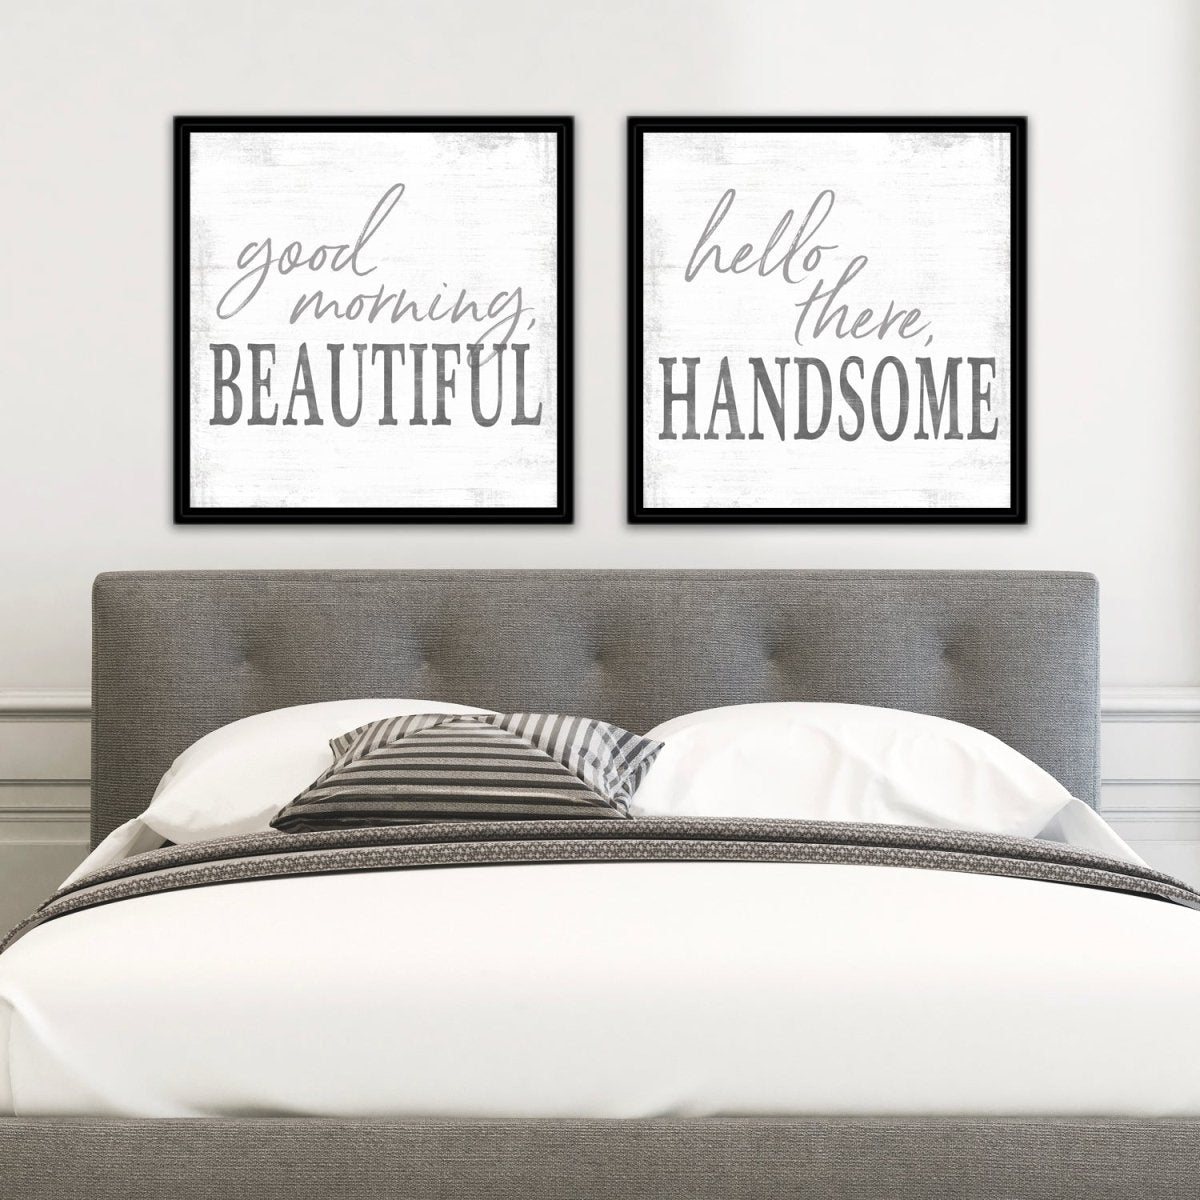 Good Morning Beautiful, Hello There Handsome Wall Art Above Bed - Pretty Perfect Studio